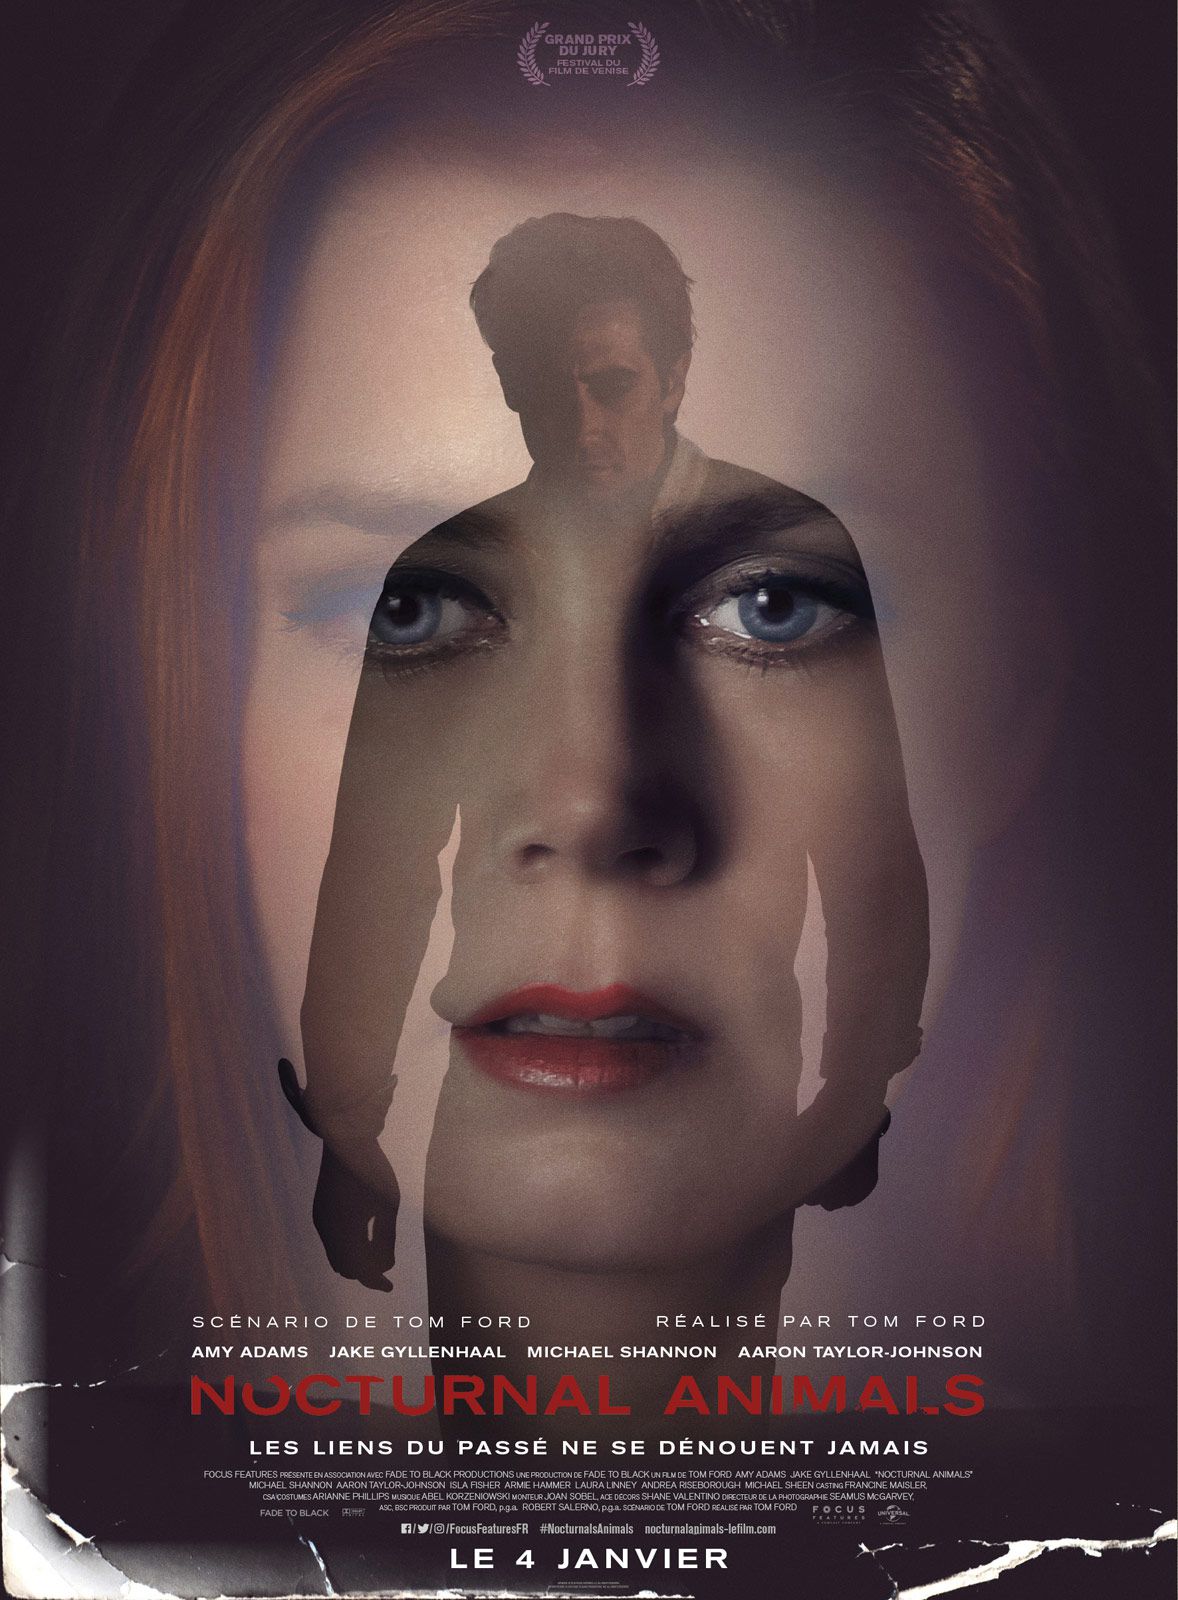 Nocturnal Animals - Film (2016) streaming VF gratuit complet